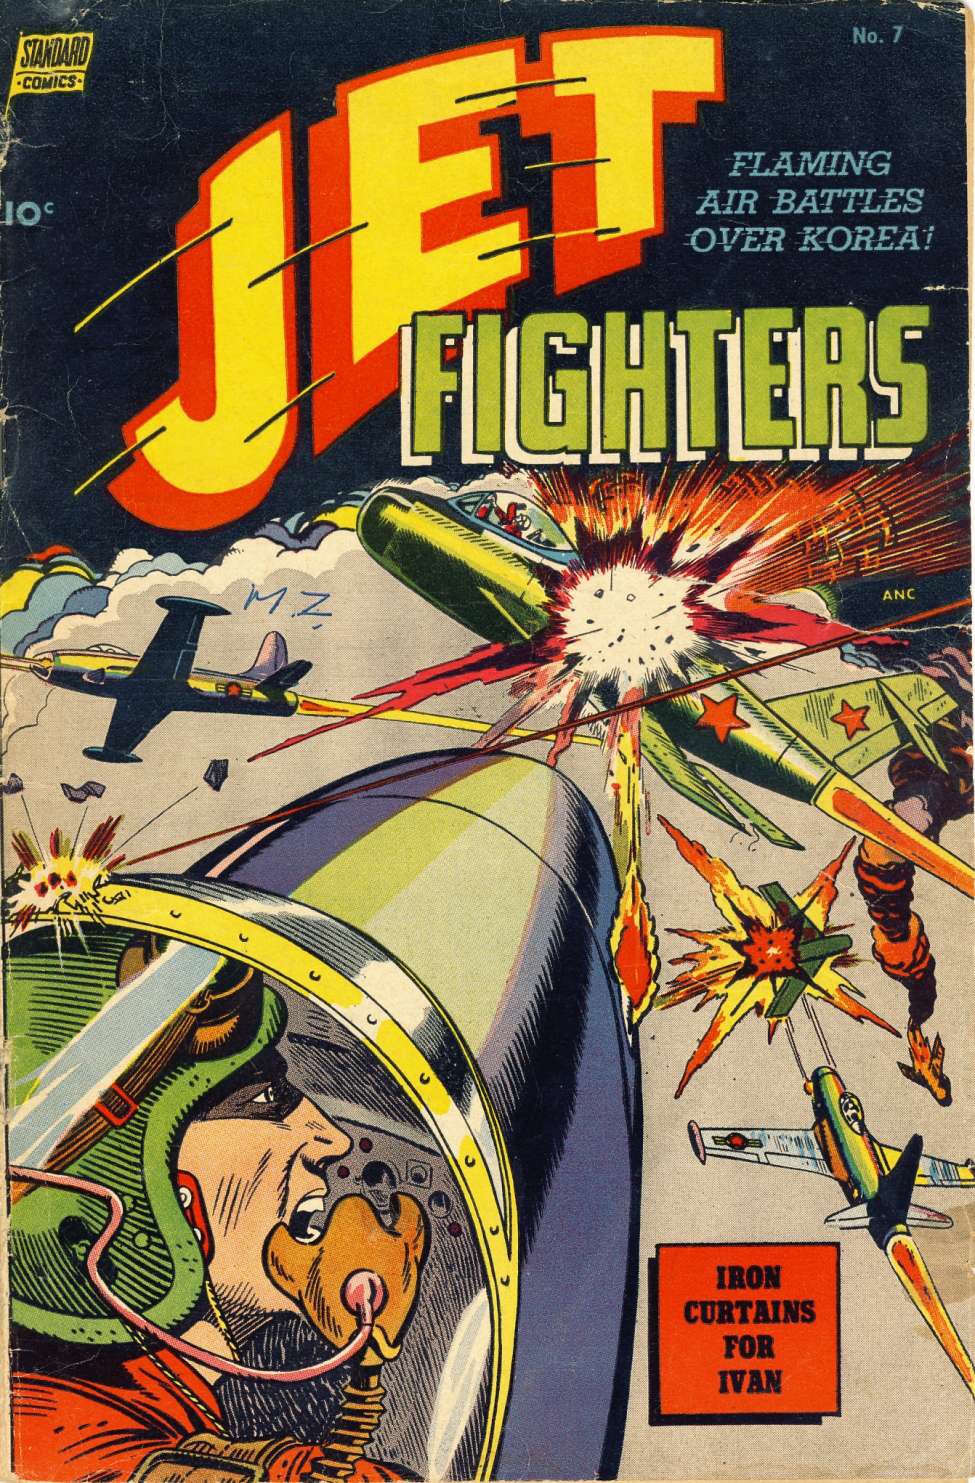 Jet Fighters #7, published in 1953, cover credited to John Celardo